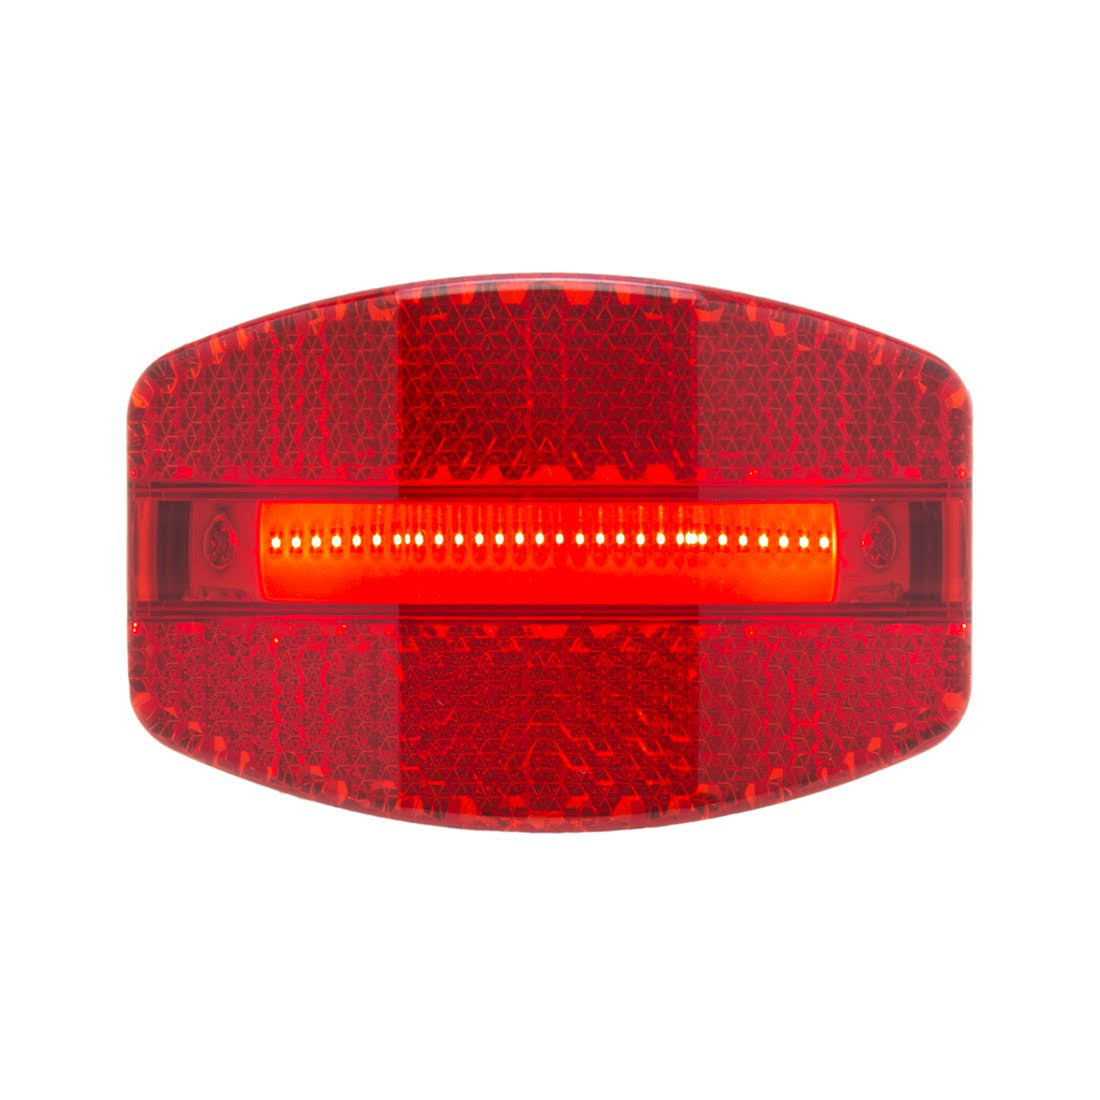 Planet Bike 3020 Grateful Red Taillight